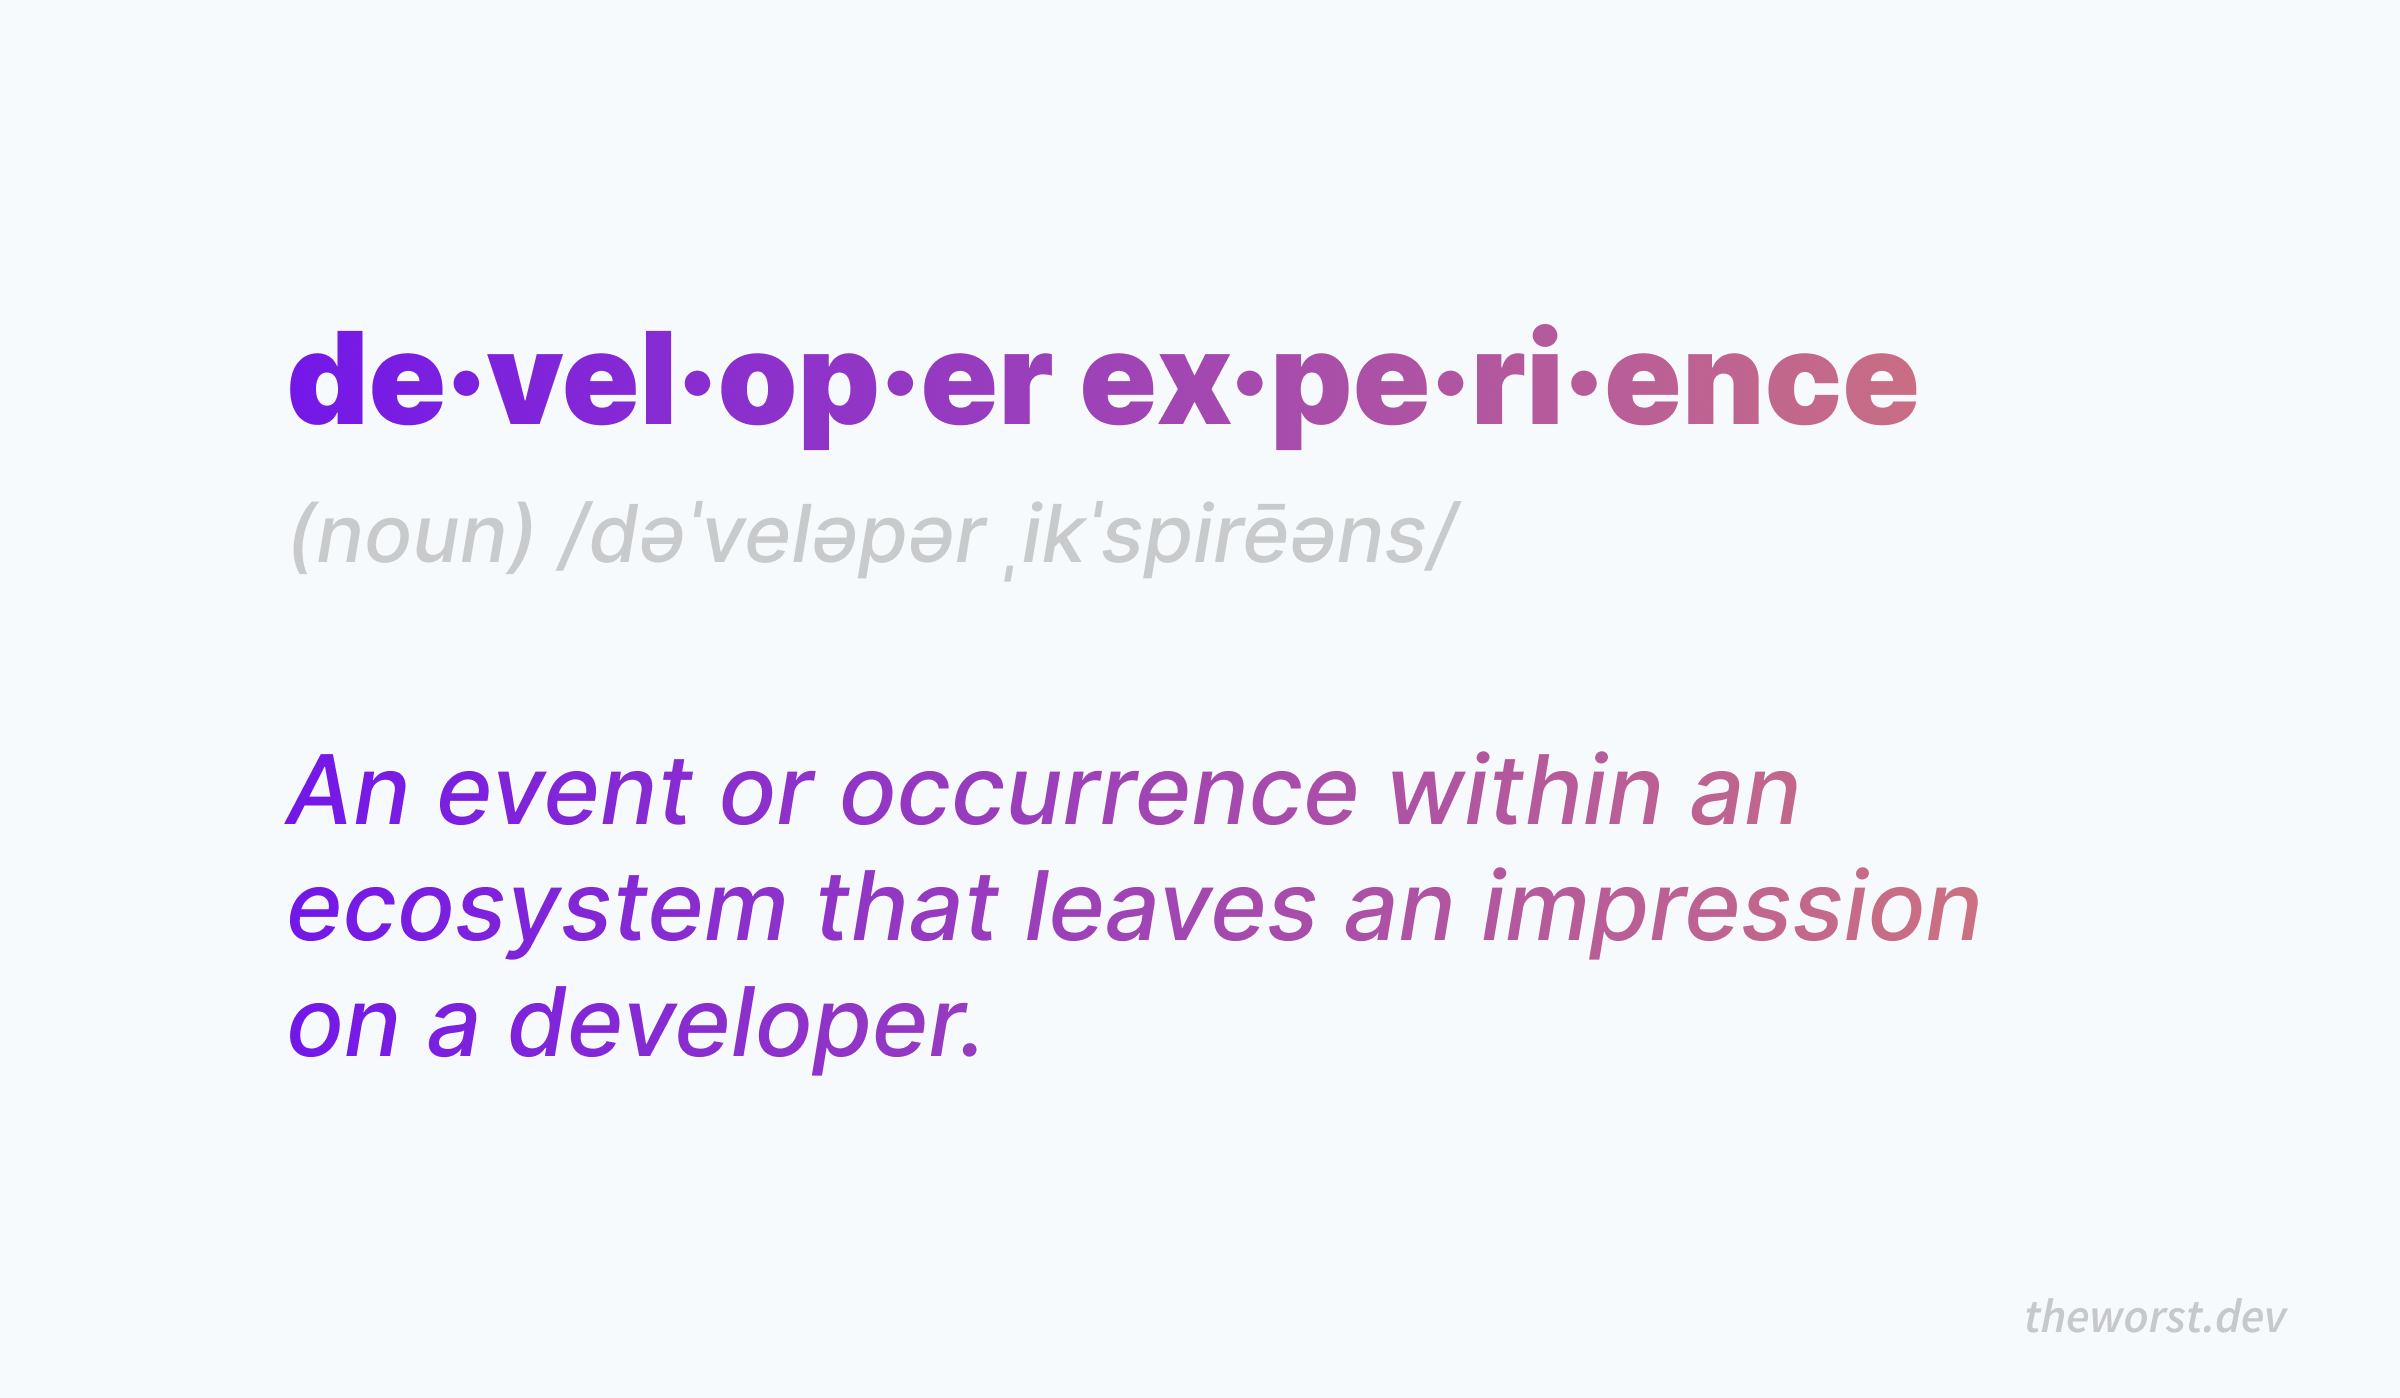 developer experience (noun): An event or occurrence within an ecosystem that leaves an impression on a developer.